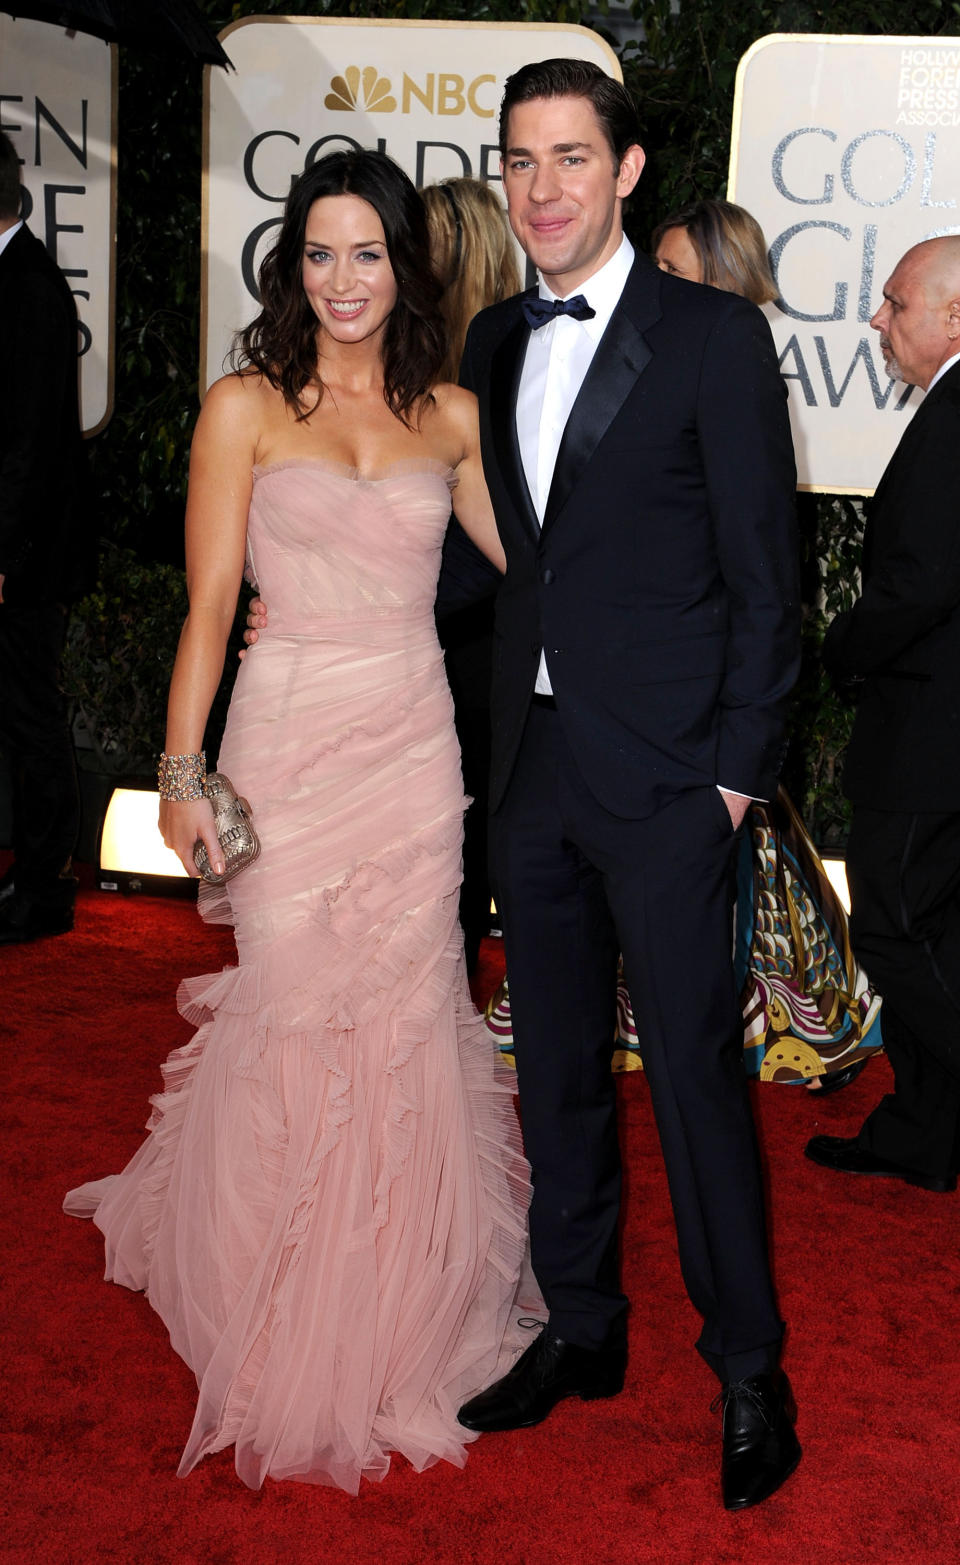 Actors Emily Blunt poses in a pink Dolce & Gabbana gown with John Krasinski at the 2010 Golden Globe Awards. (Image via Getty Images)